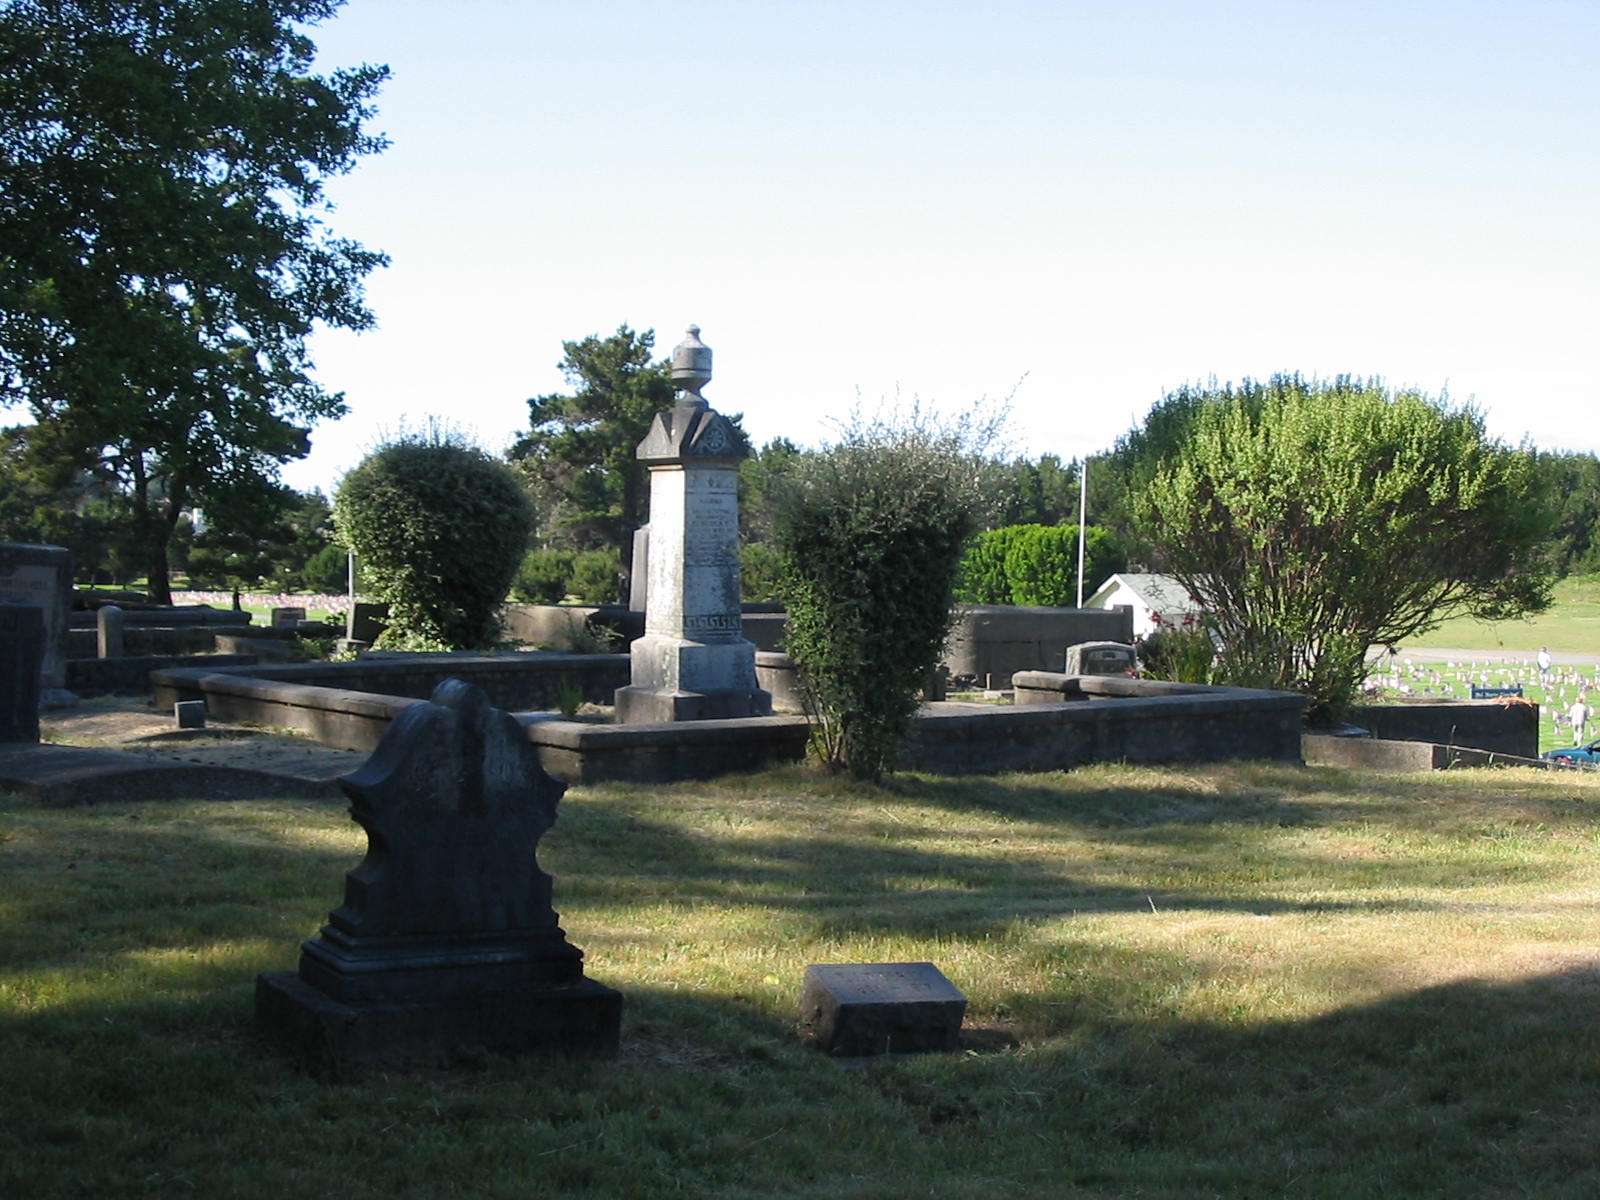 the cemetery has two headstones with green grass